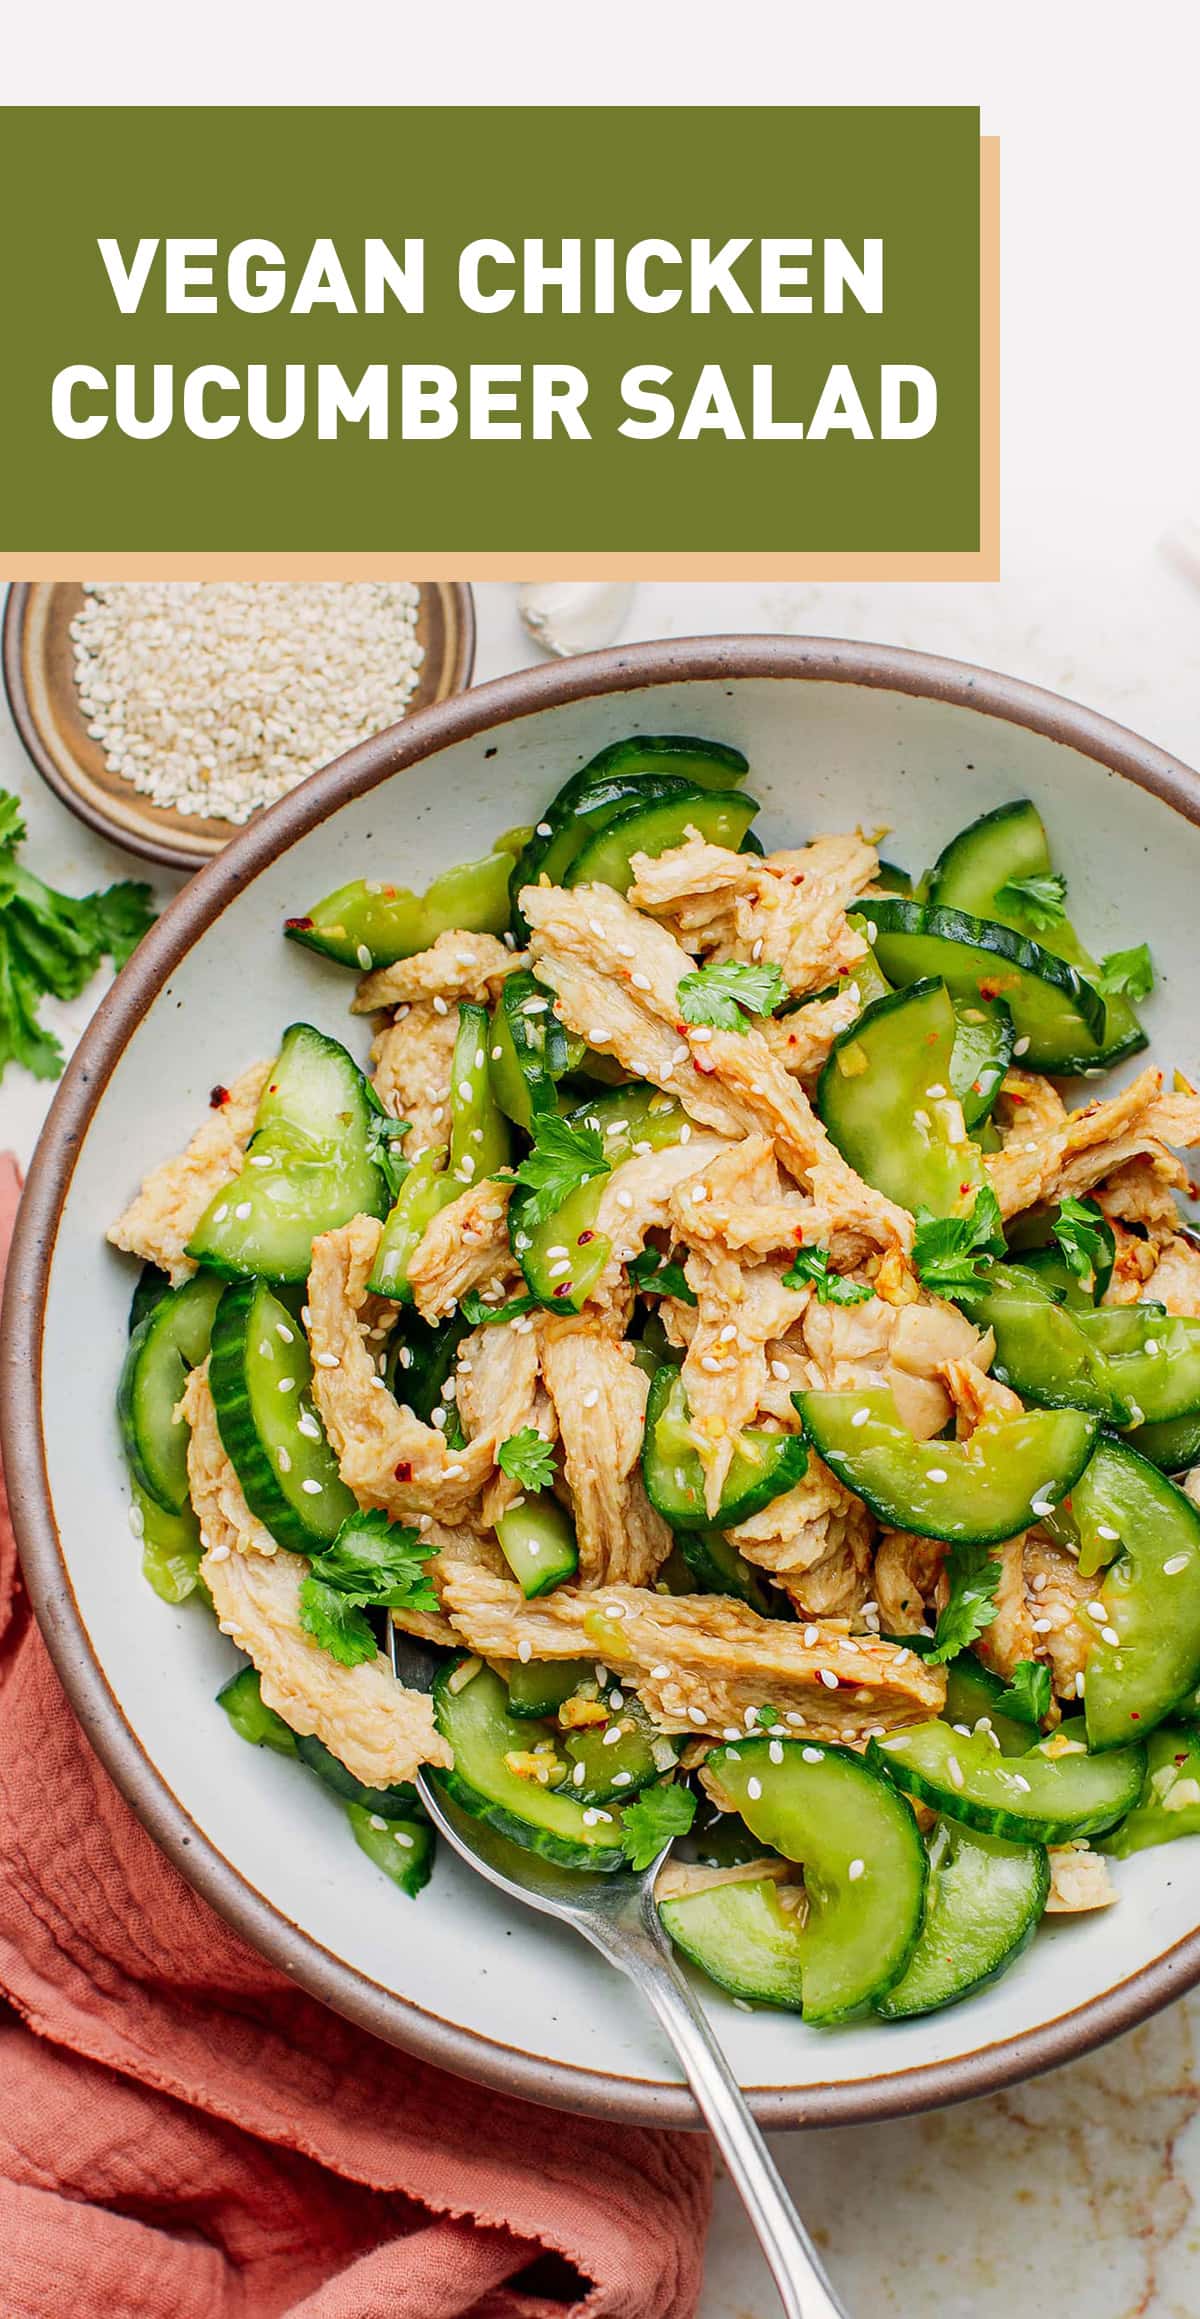 This vegan chicken cucumber salad is infused with fresh ginger and garlic, and seasoned with an Asian-inspired dressing prepared with toasted sesame oil, soy sauce, and white vinegar. A bright, fresh, and protein-packed salad! #salad #vegan